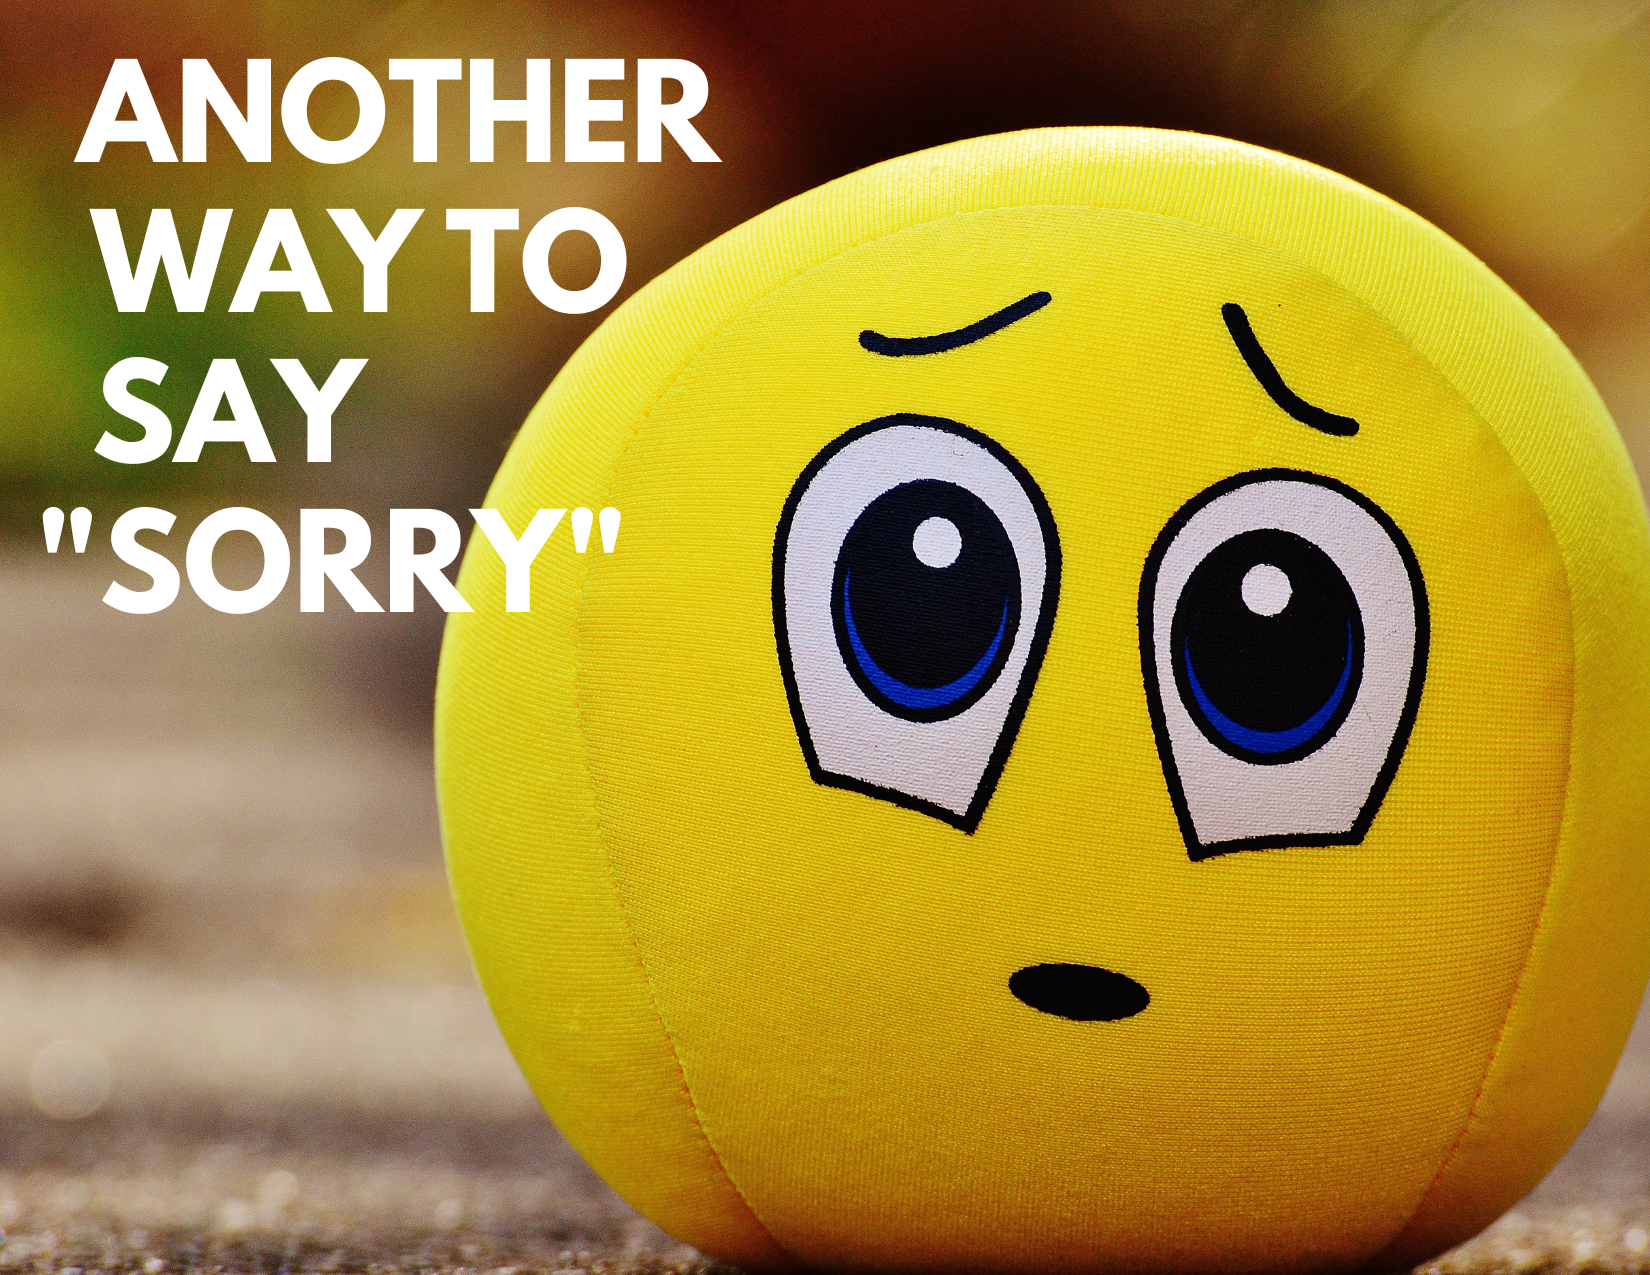 another way to say sorry caption over a graphic of a tennis ball with a facial expression of remorse